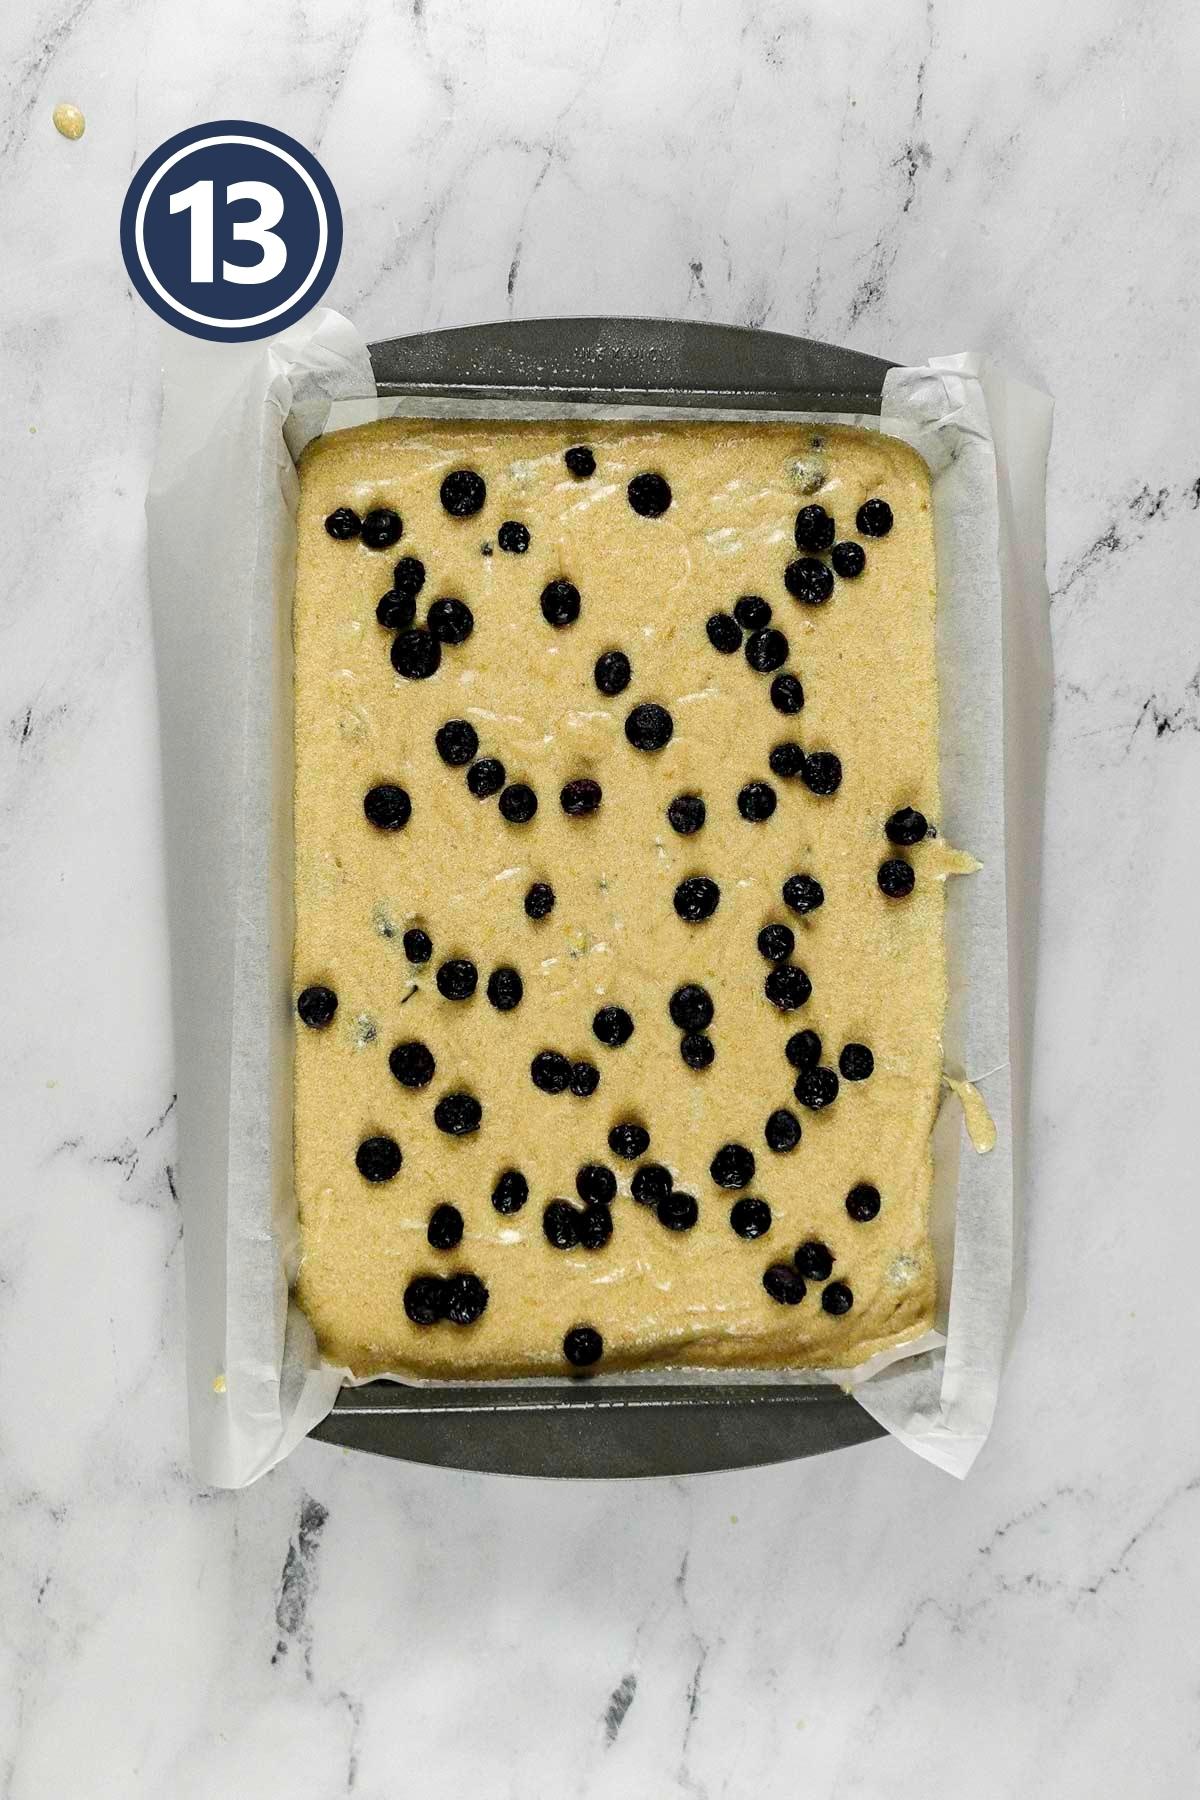 the cake batter sprinkled with blueberries on the top.